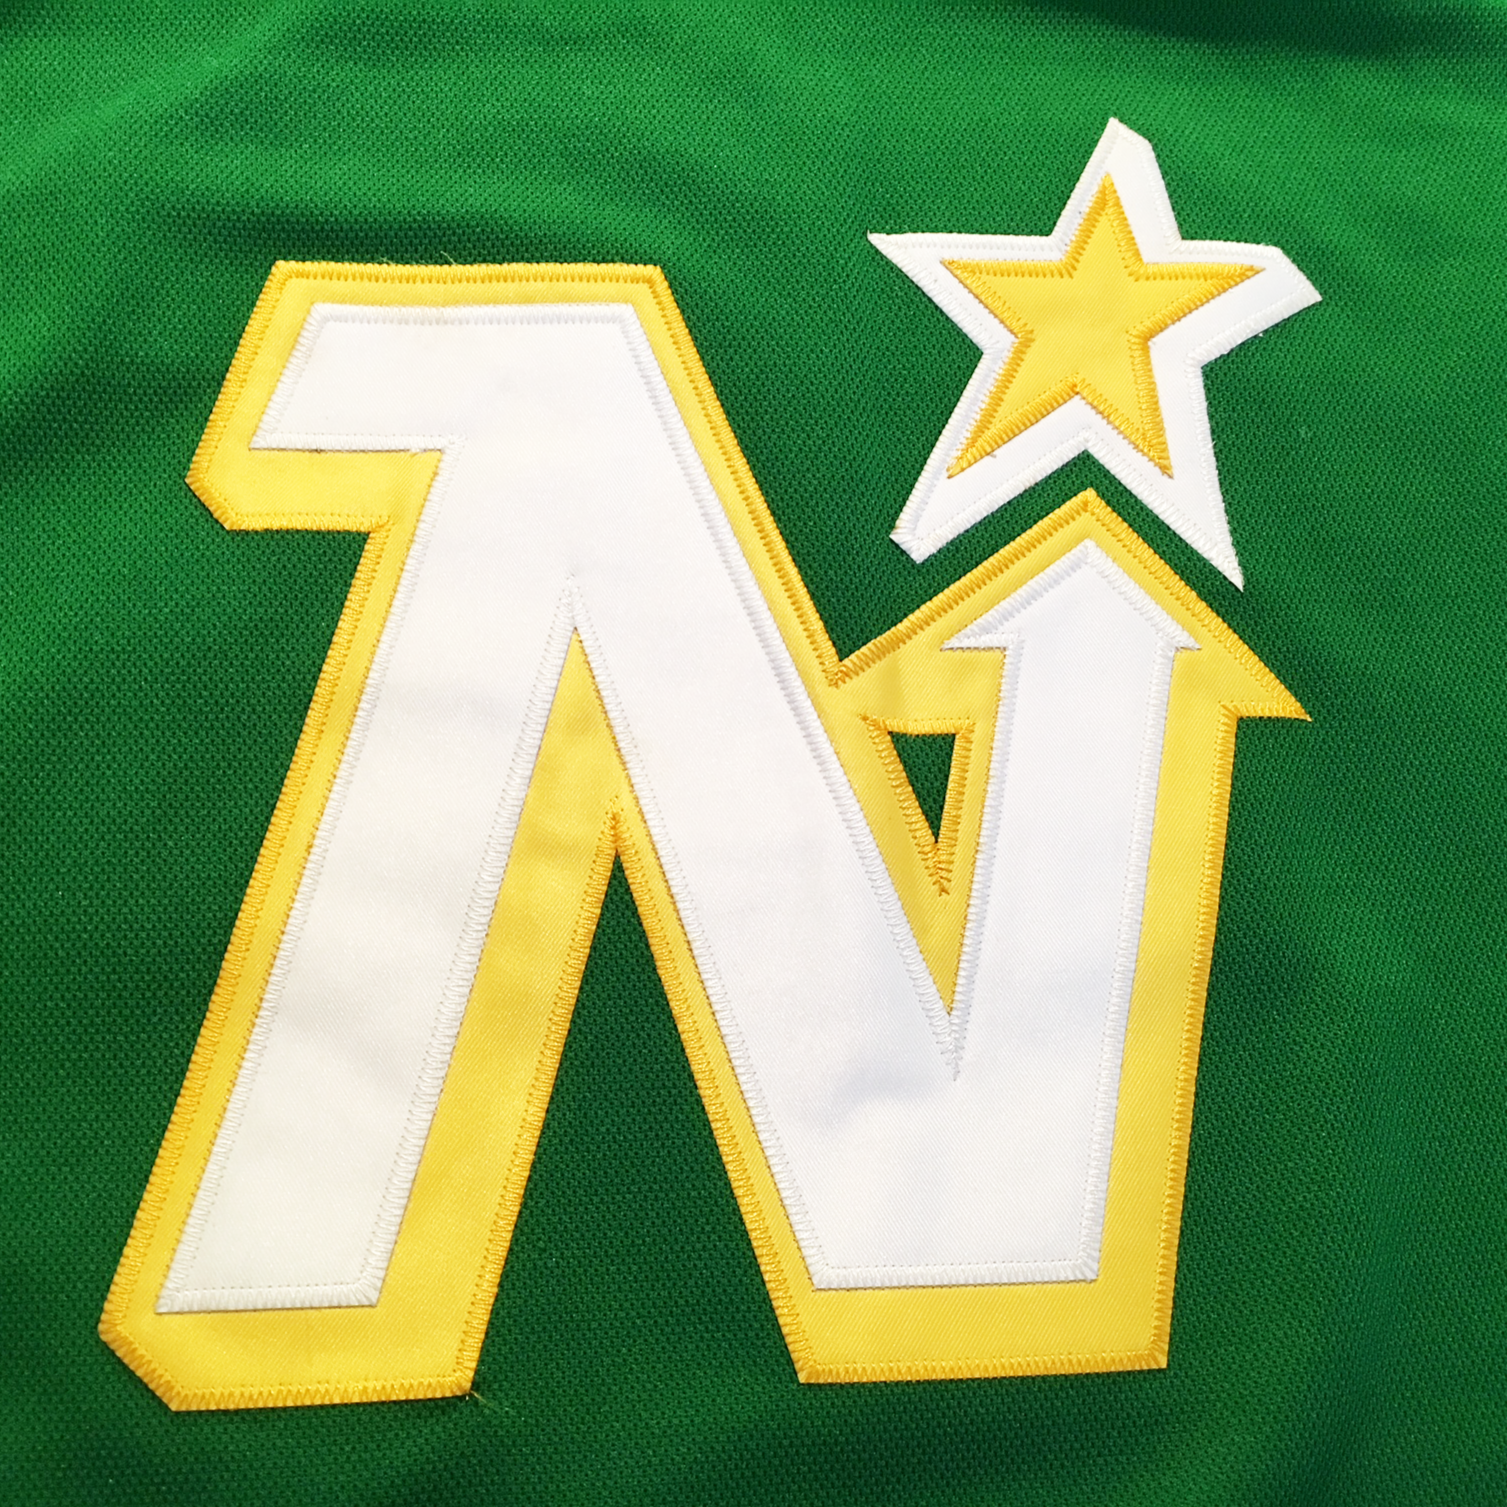 Green and White Hockey Jerseys with The North Stars Twill Logo Adult XL / (with Player Number) / White